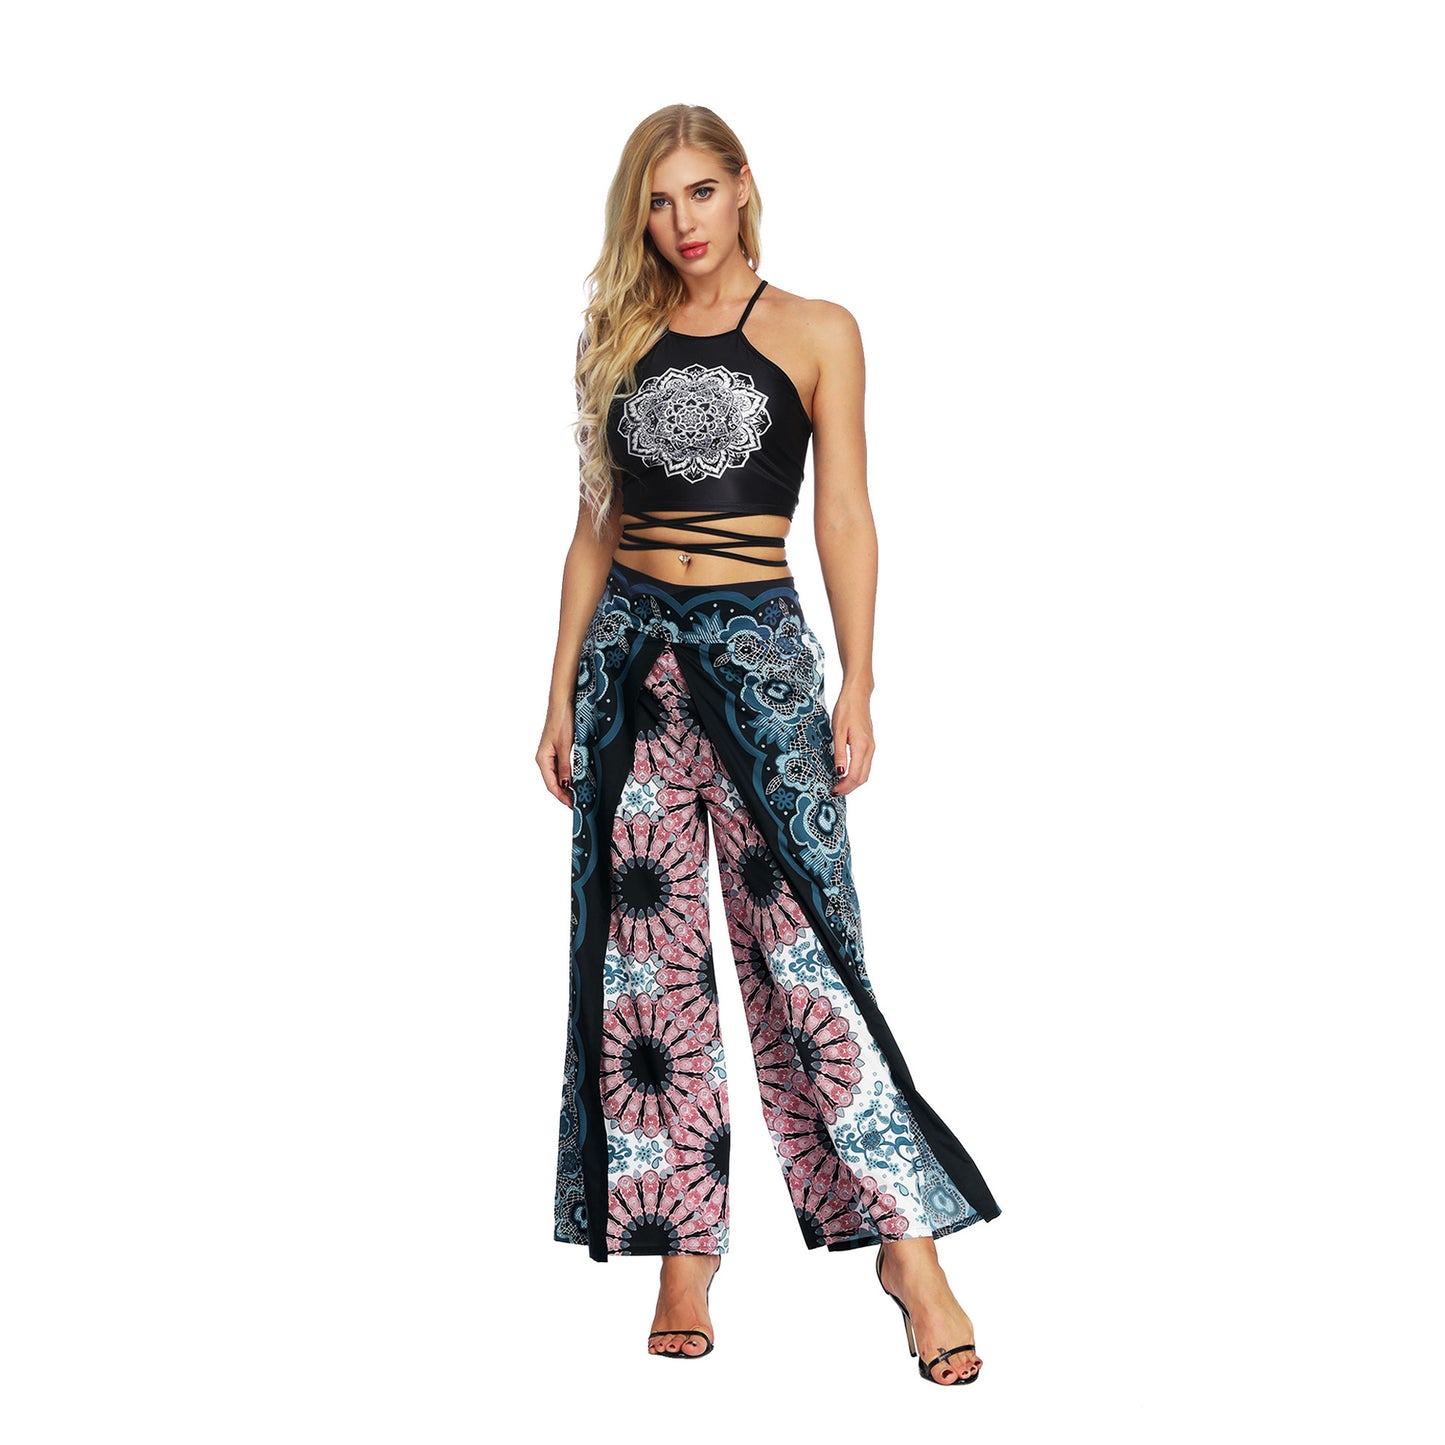 Crowned Paradise Skirt